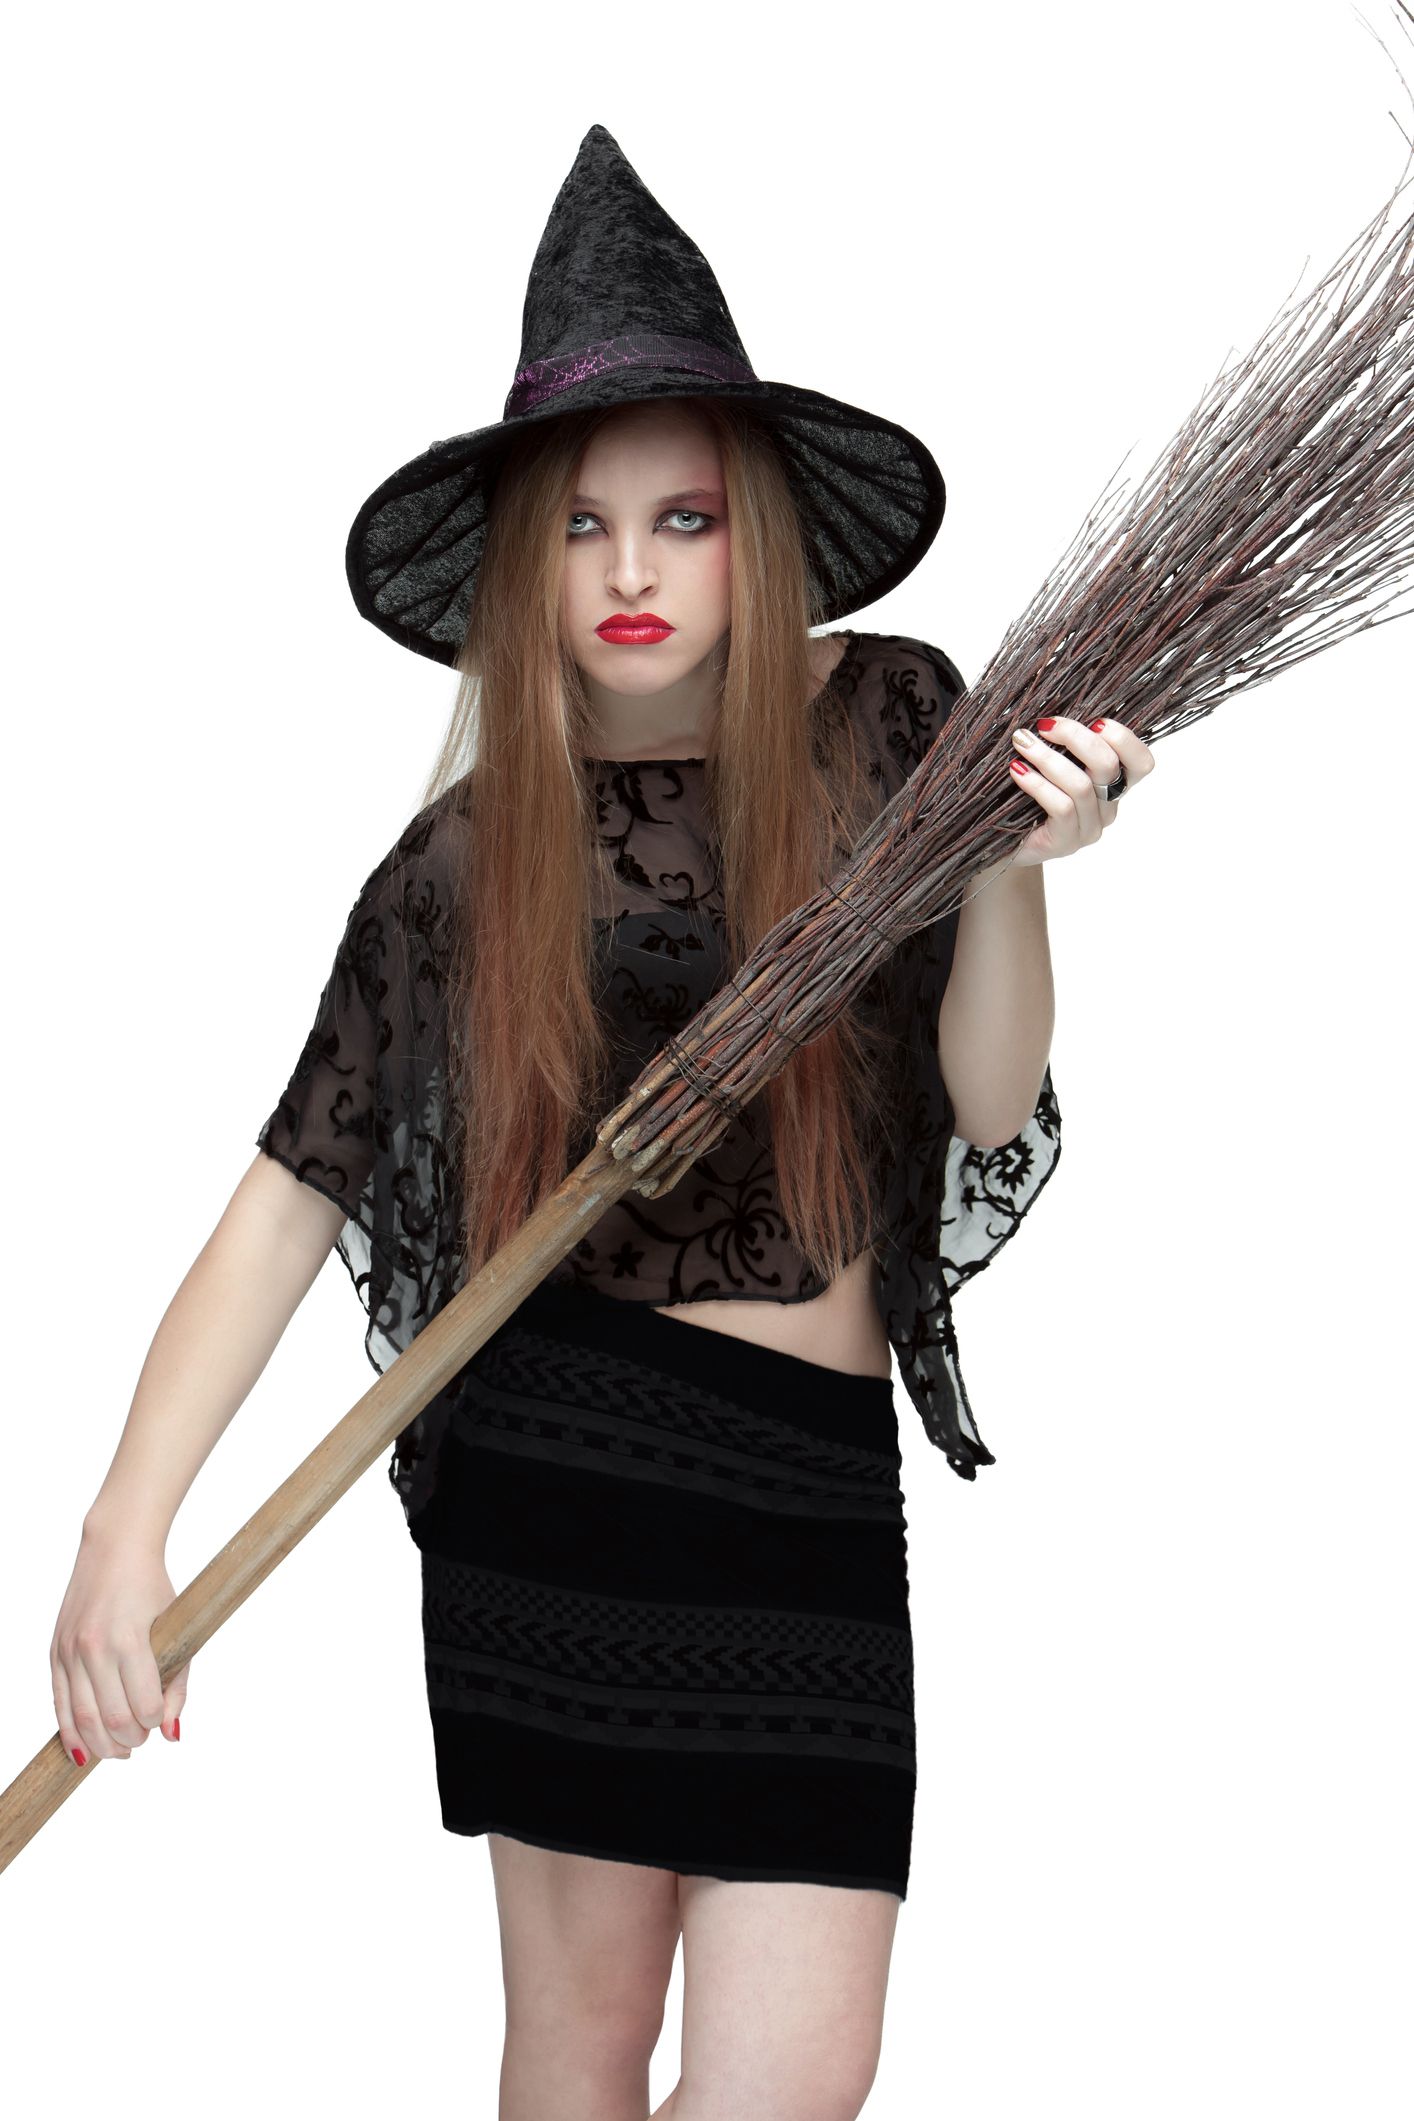 homemade adult halloween witch costume Porn Pics Hd